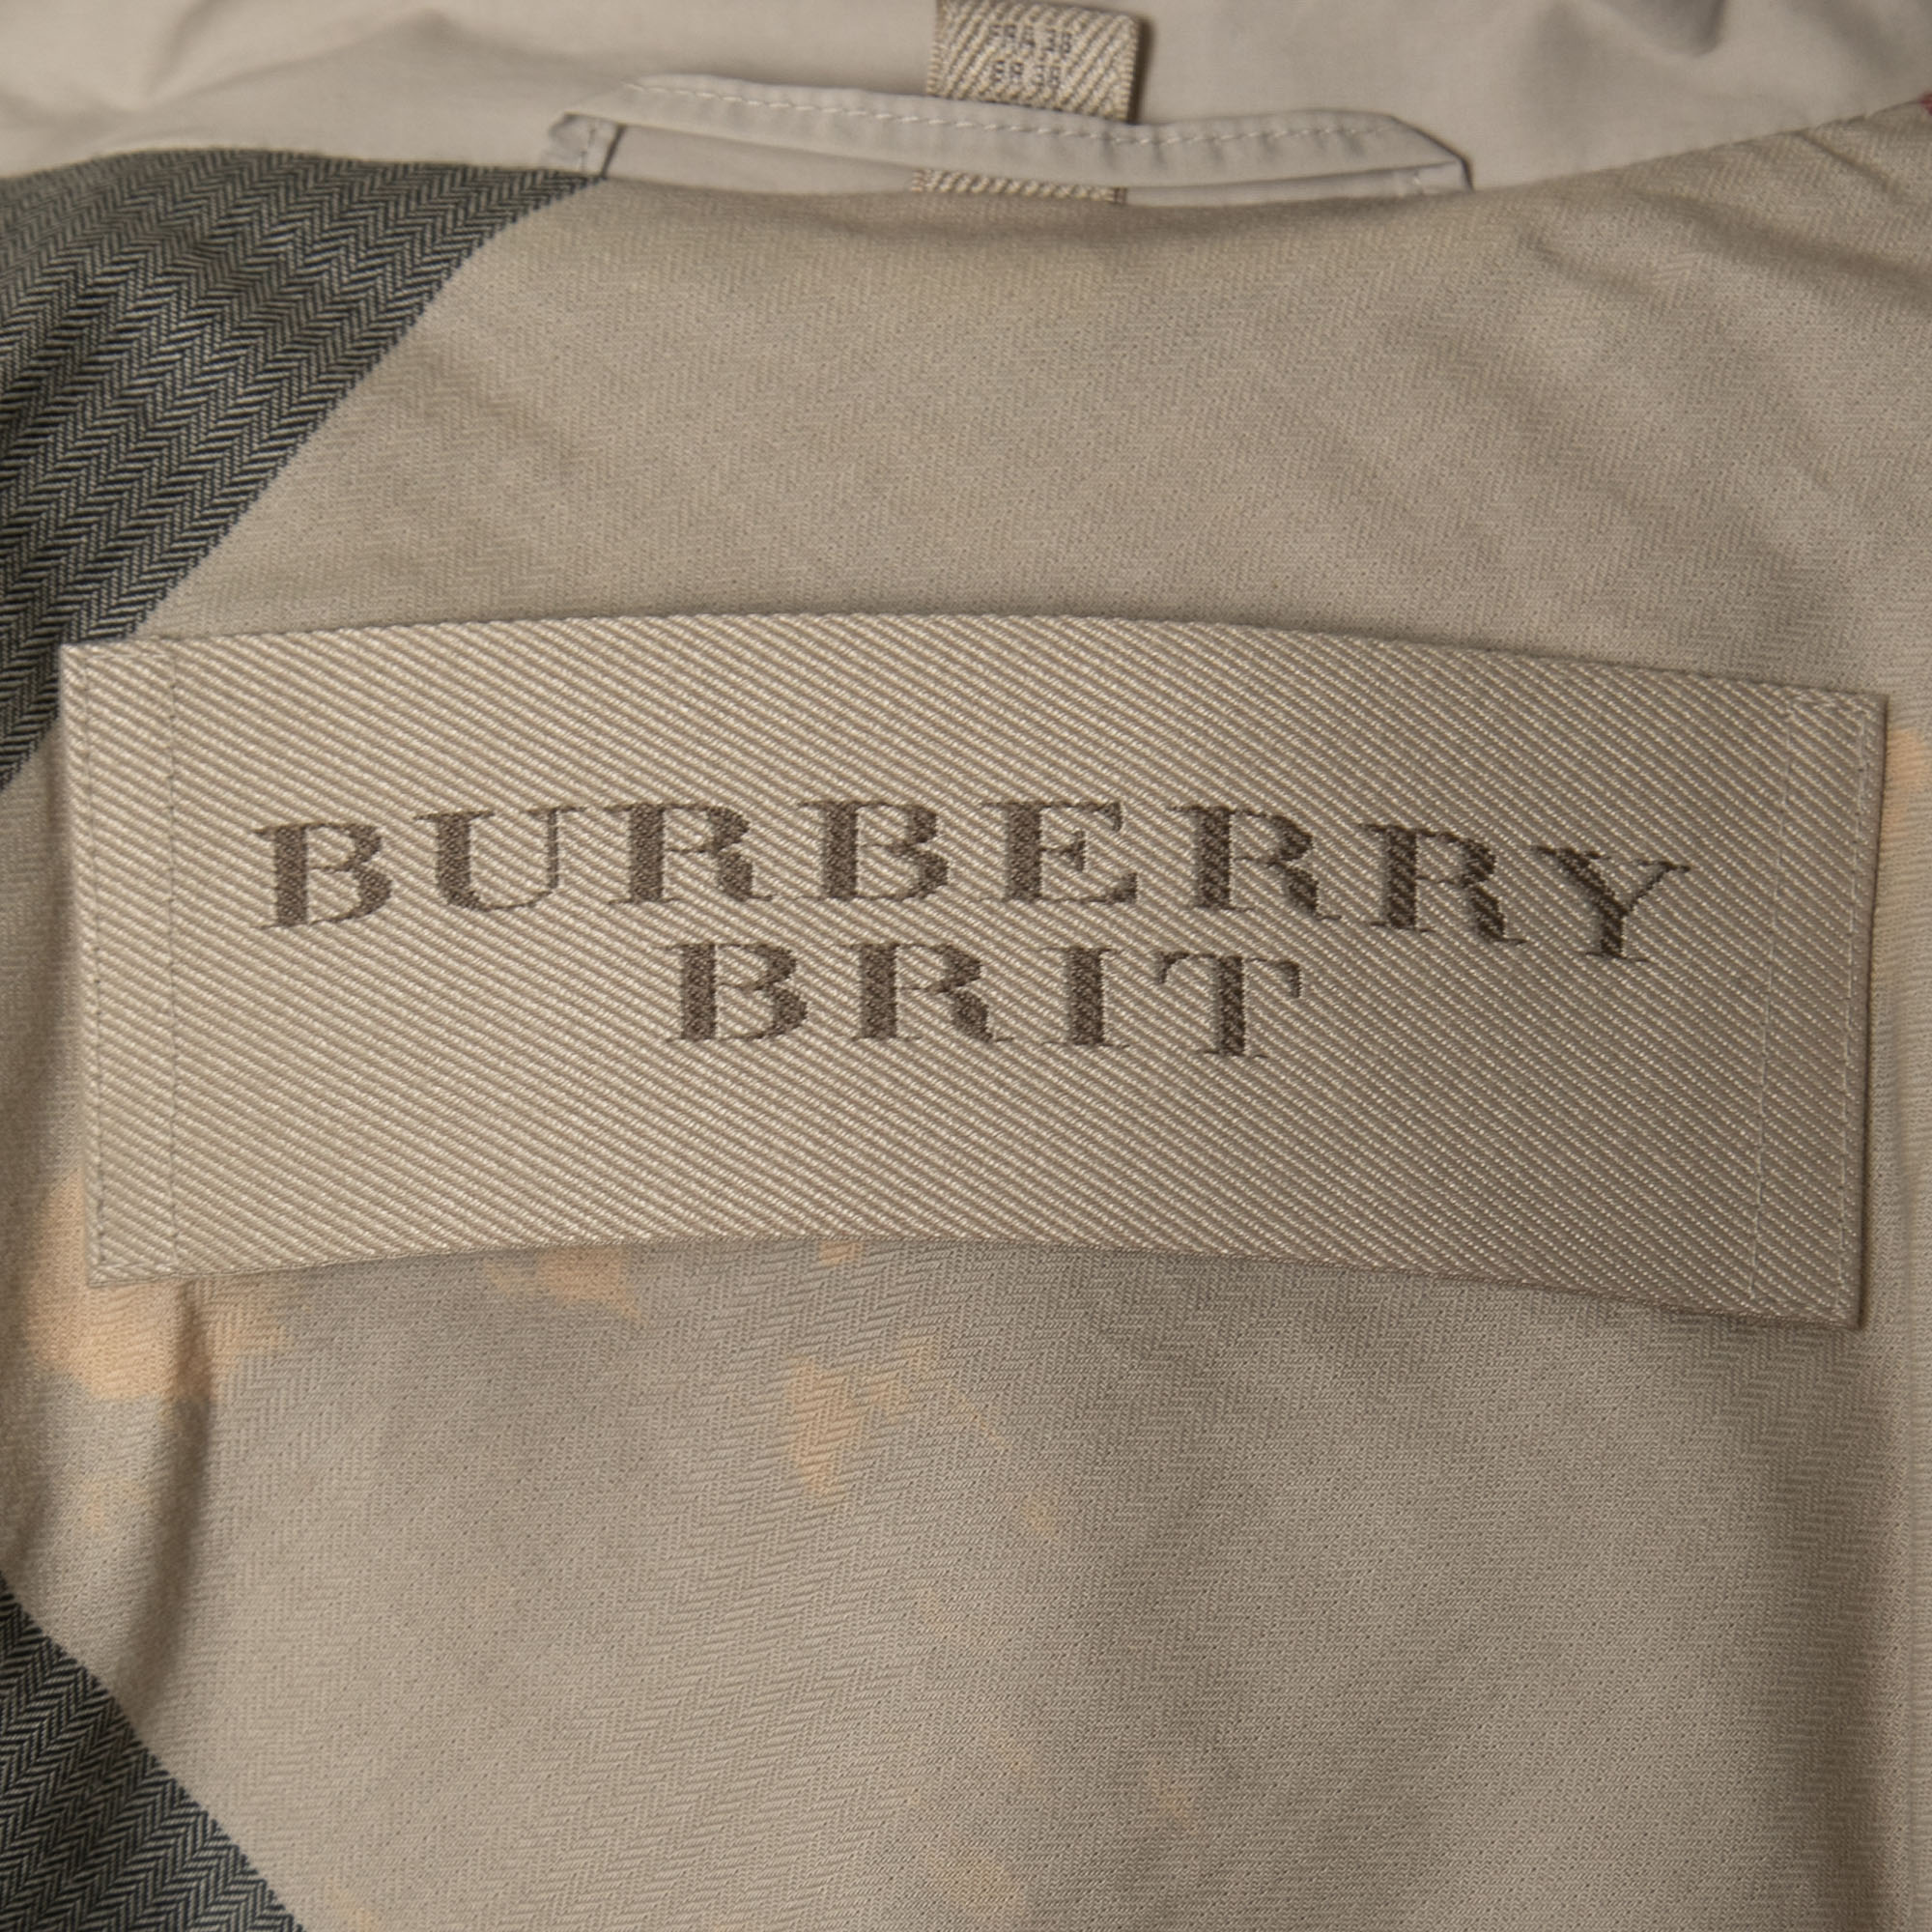 Burberry Brit Beige Cotton Belted Trench Coat S Burberry Brit | TLC